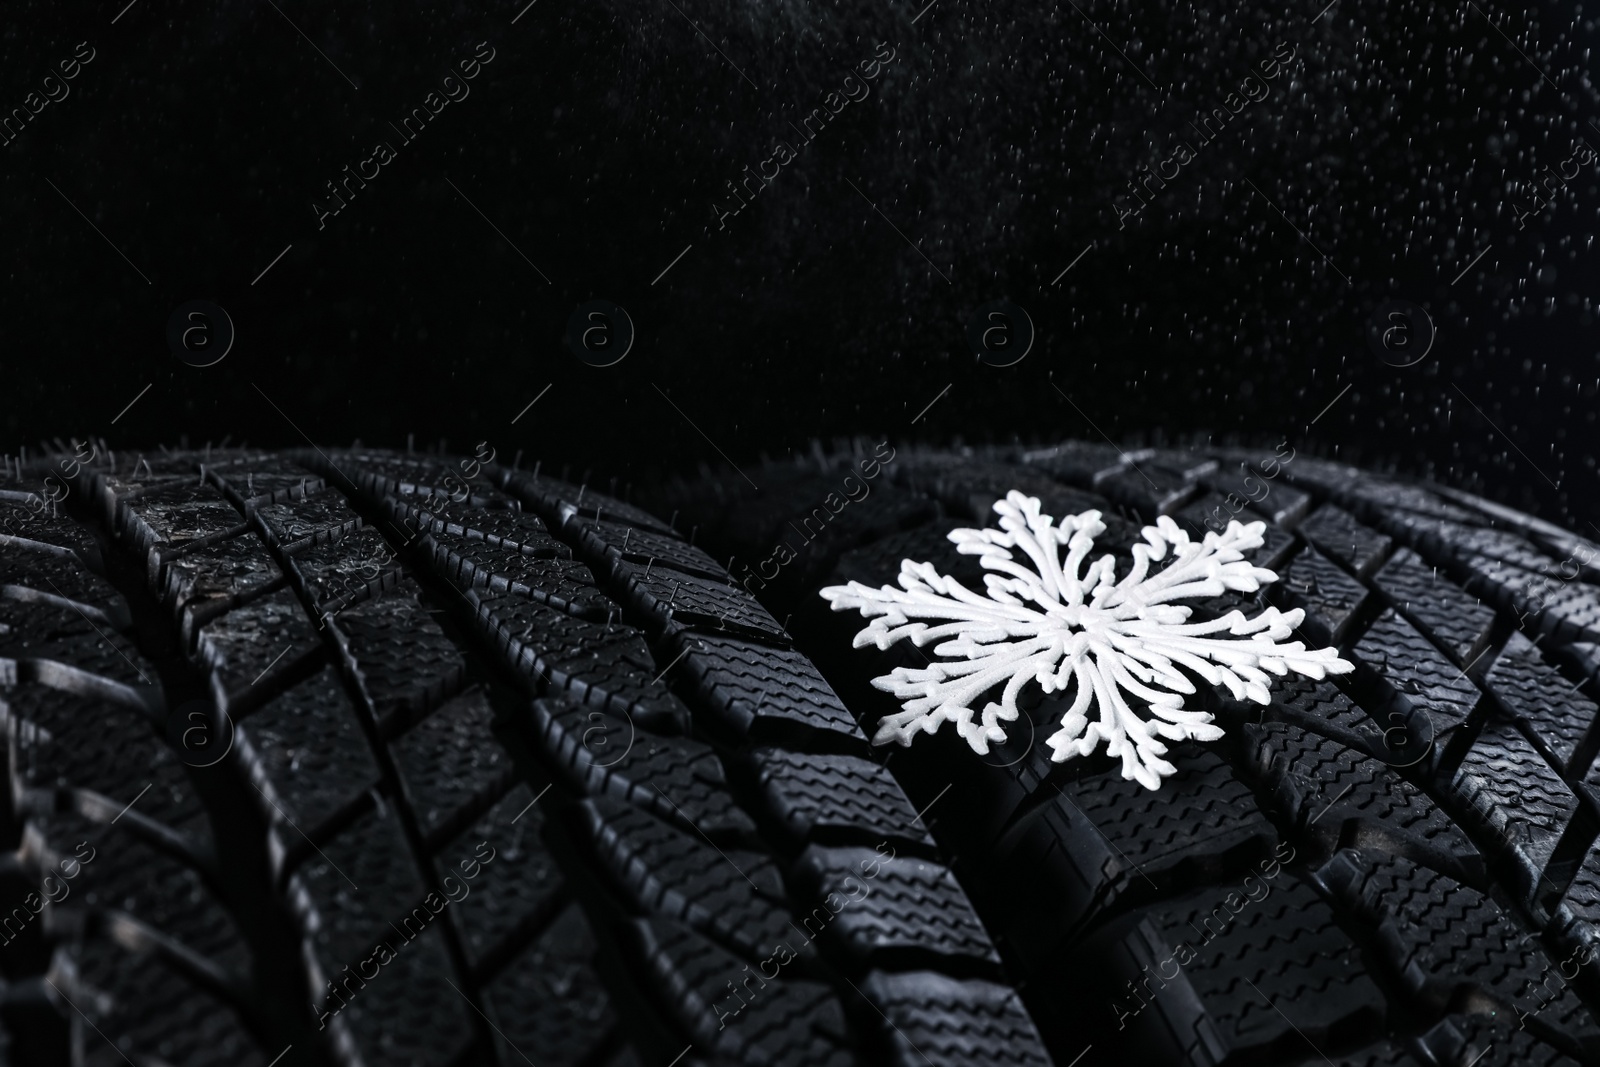 Photo of Winter tires with decorative snowflake on black background, closeup